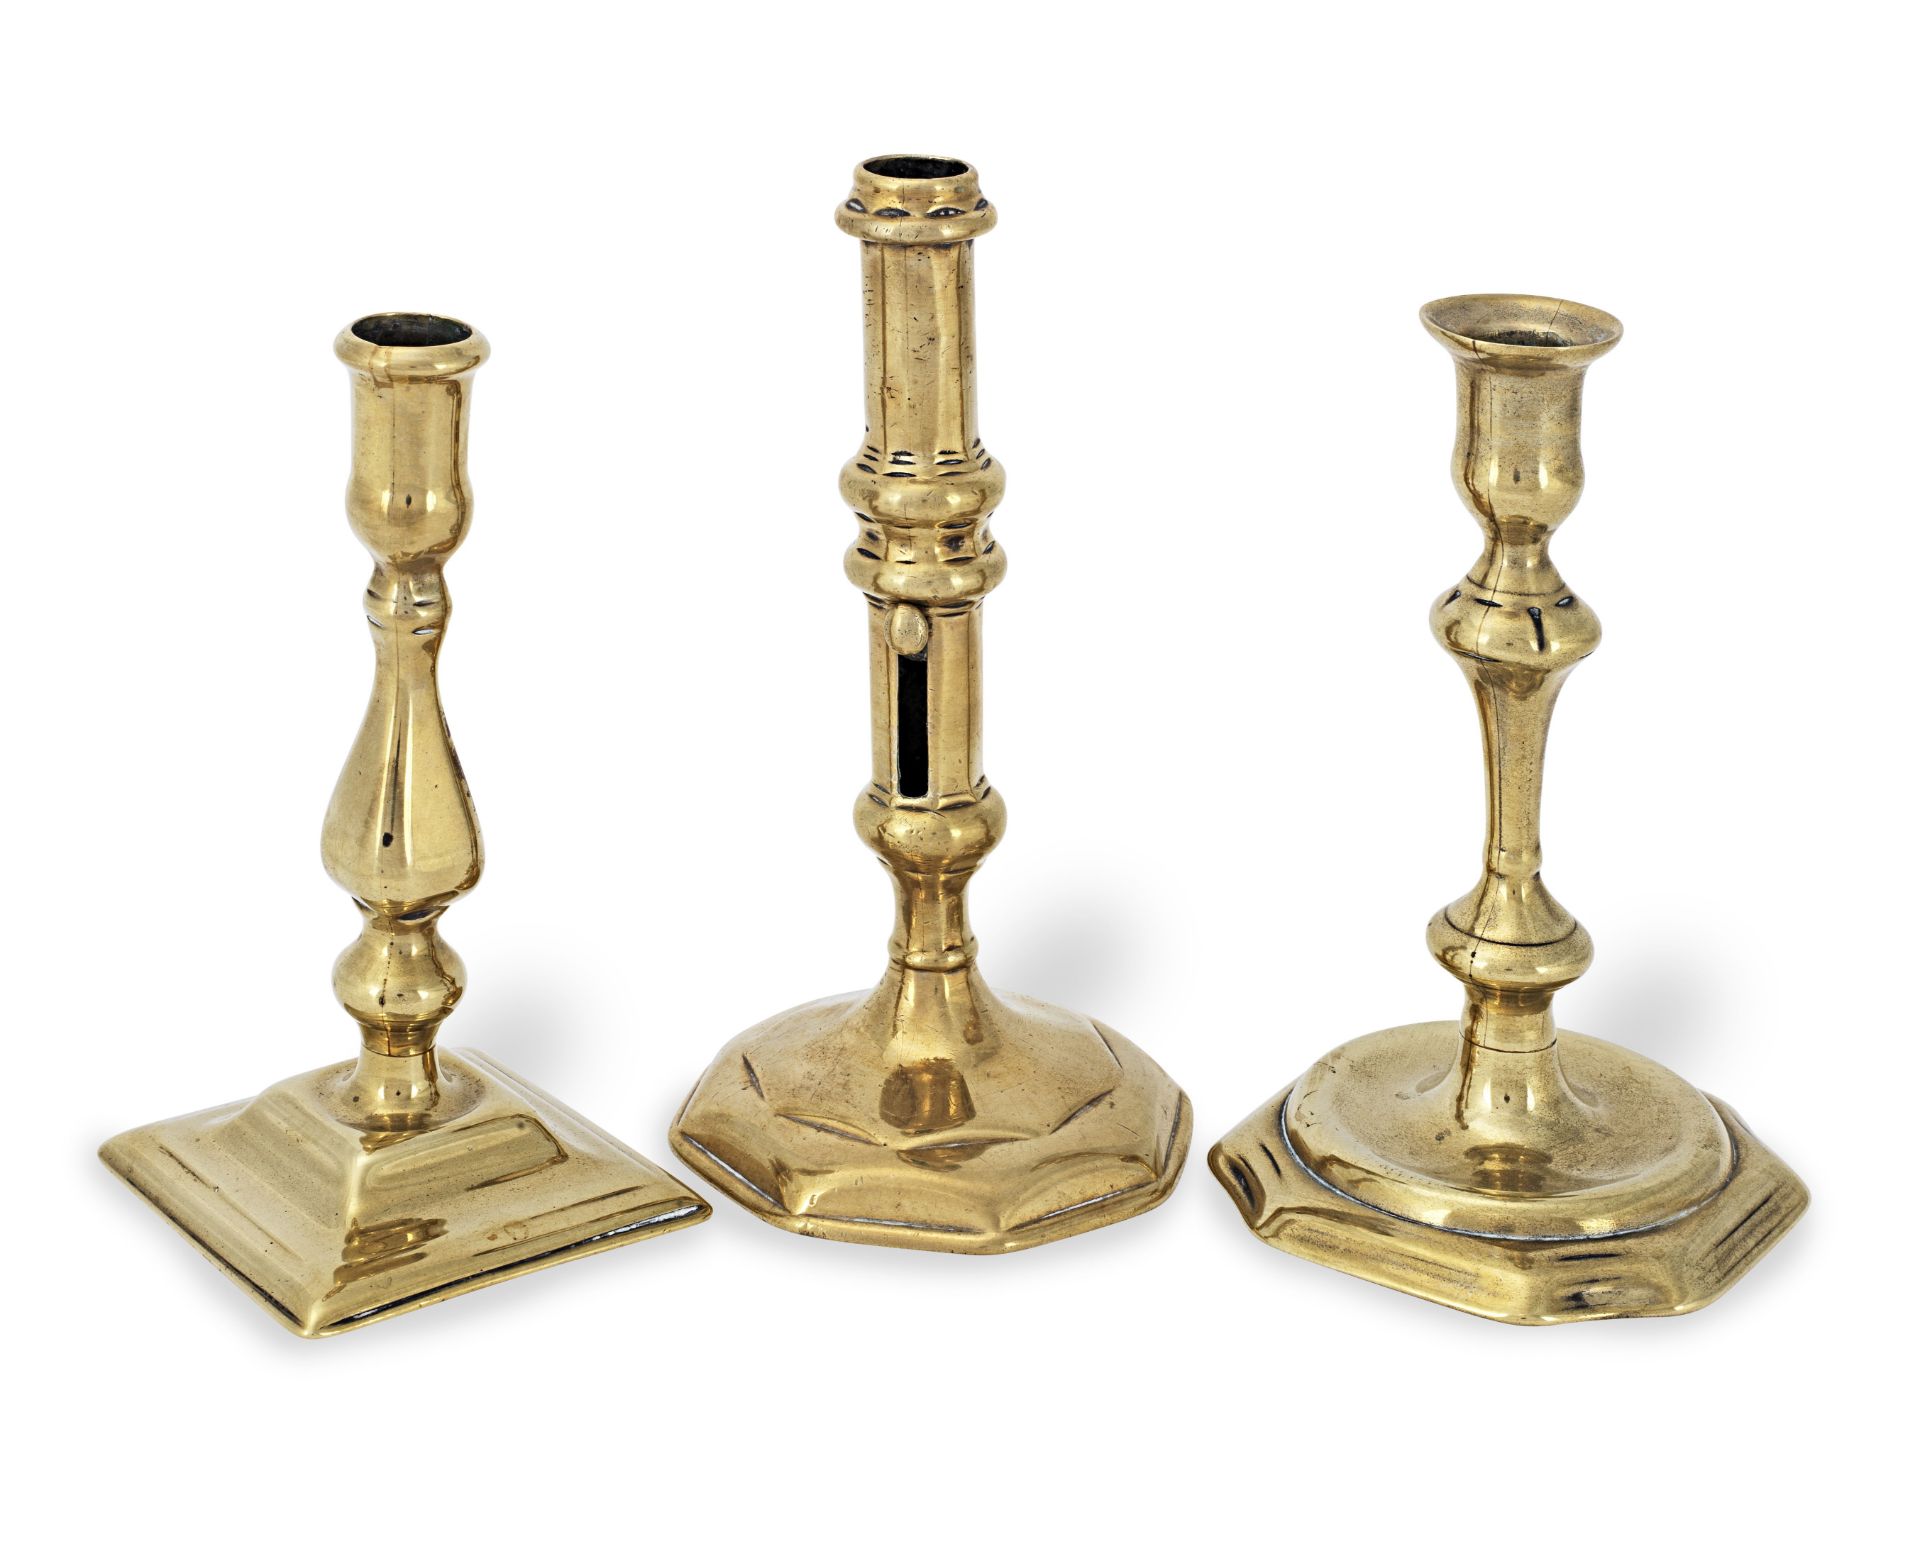 A Queen Anne/George I brass ejector socket candlestick, circa 1705-1720 (3)